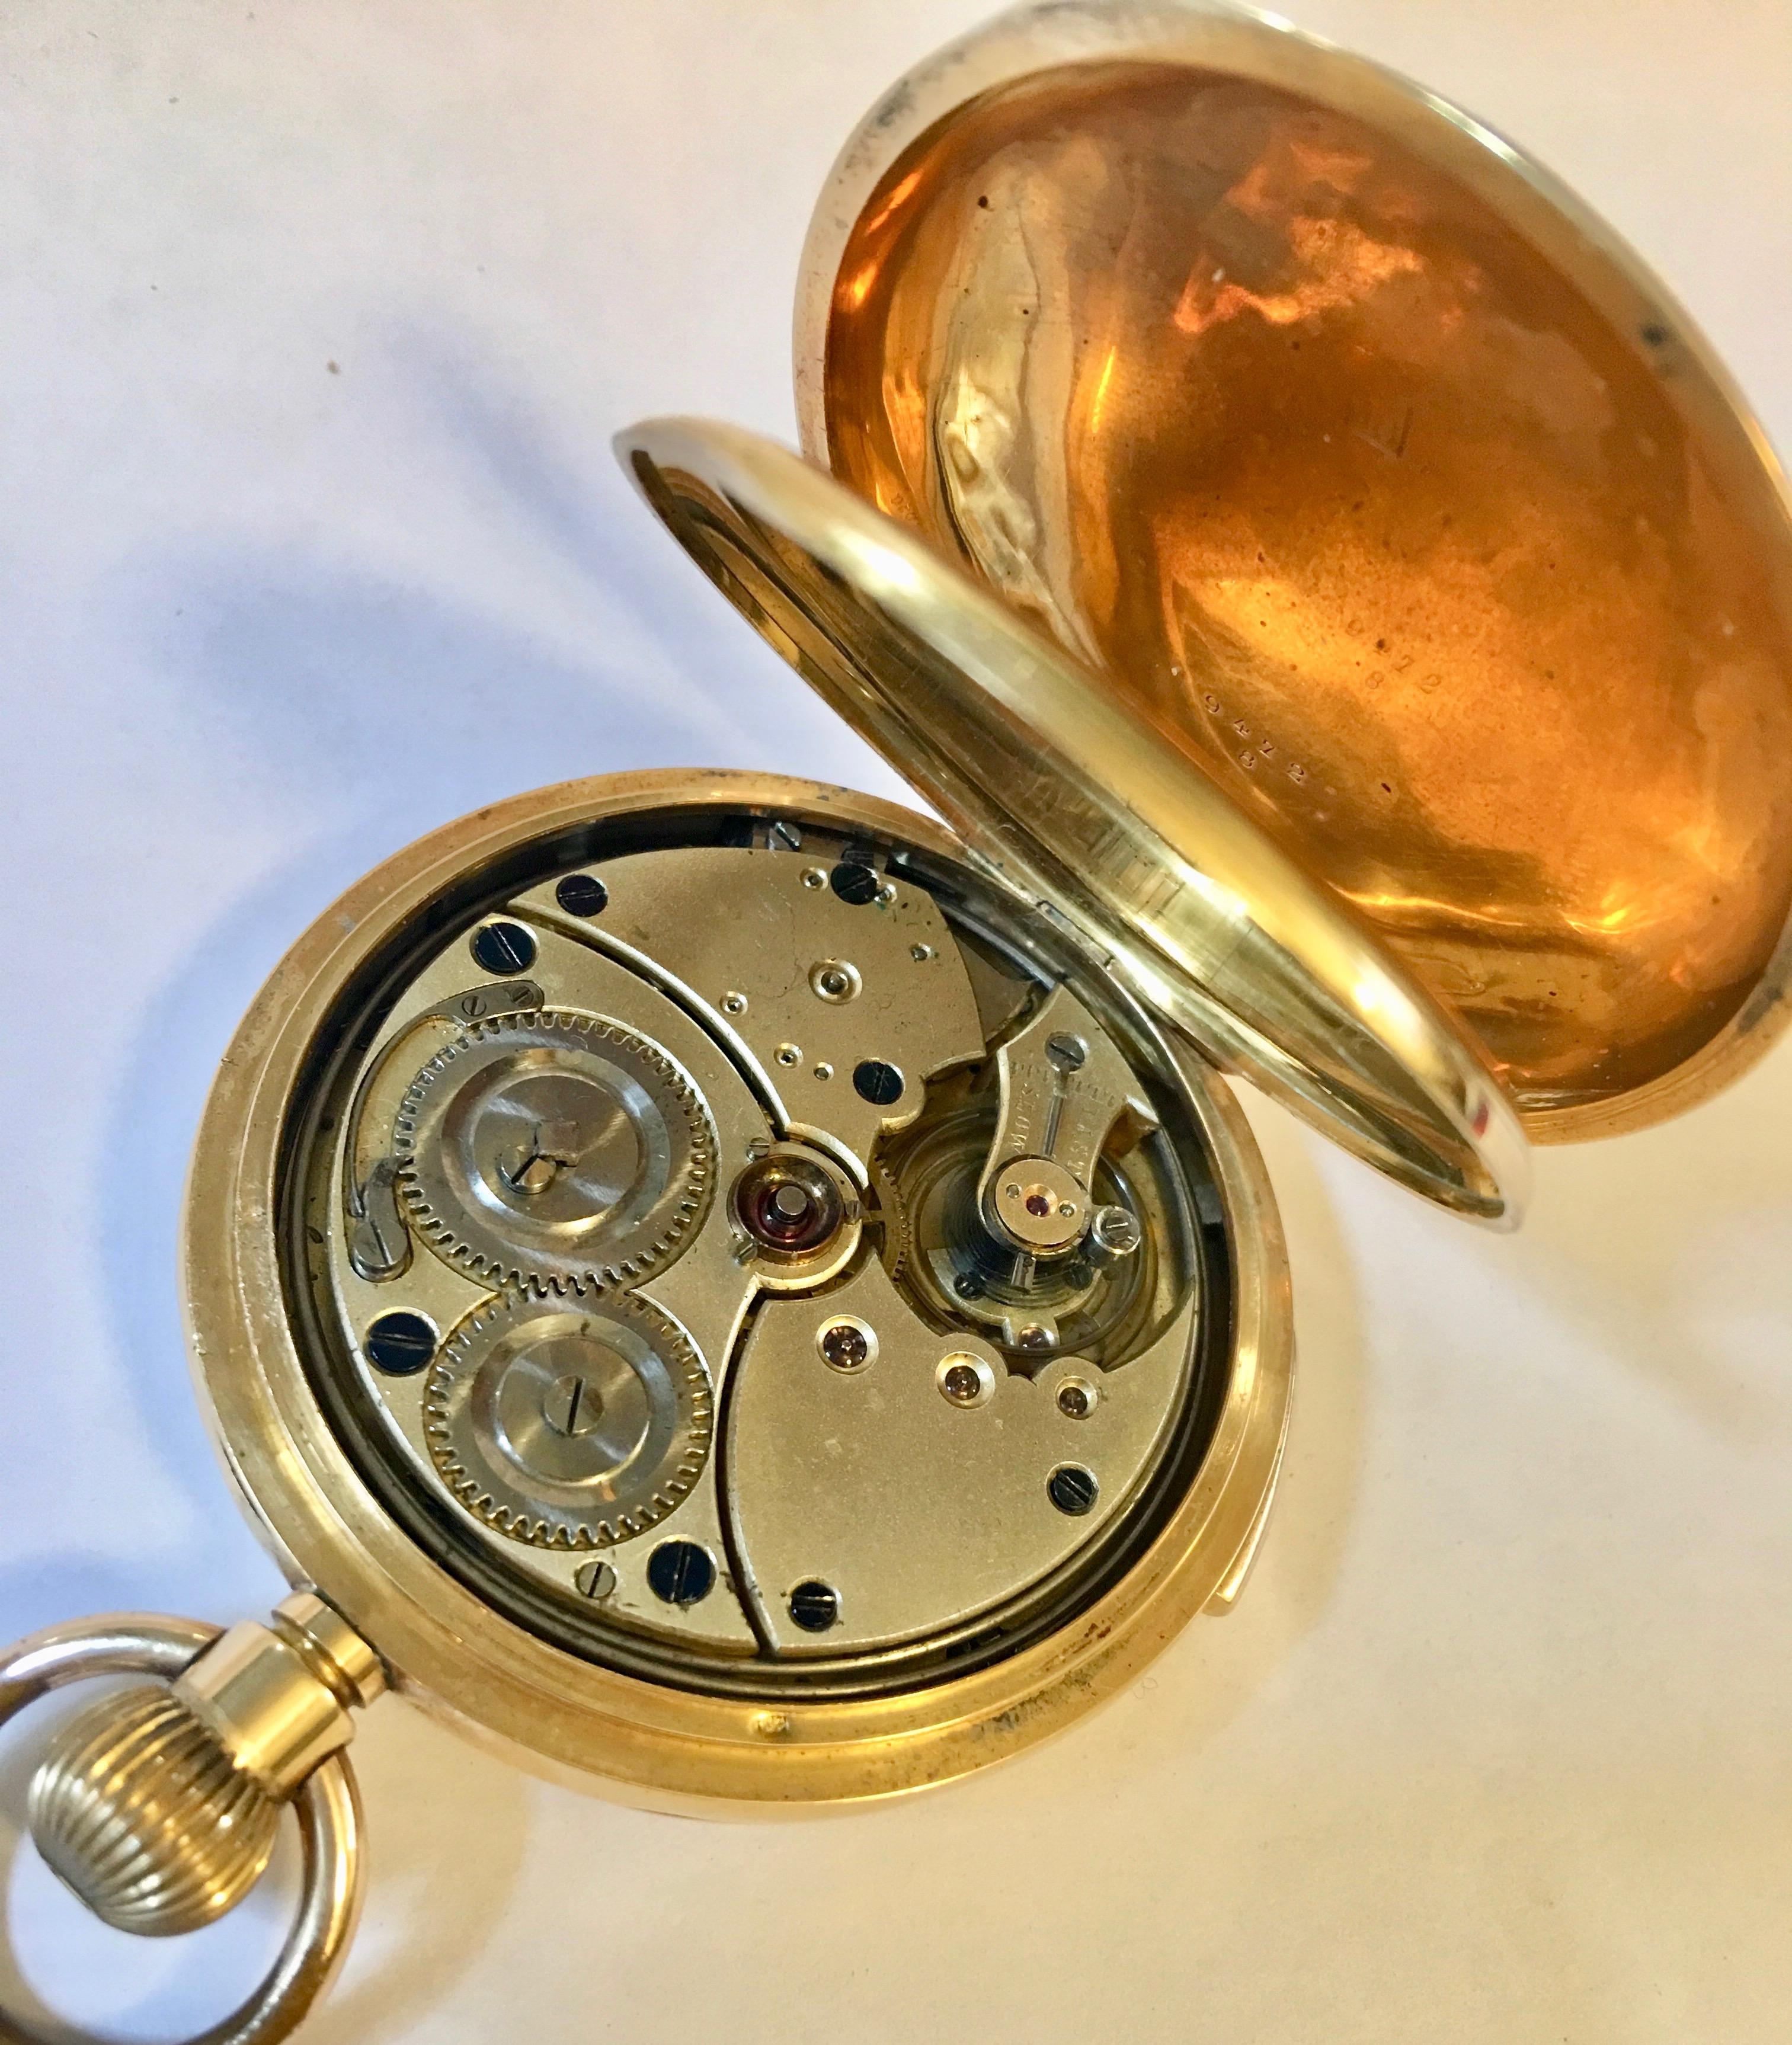 This beautiful antique hand winding quarter repeating pocket watch is in good working condition and it is running well. A clean white enamel face with Roman numerals, a seconds subdial and blue steeled hands. The watch sits within the gold full